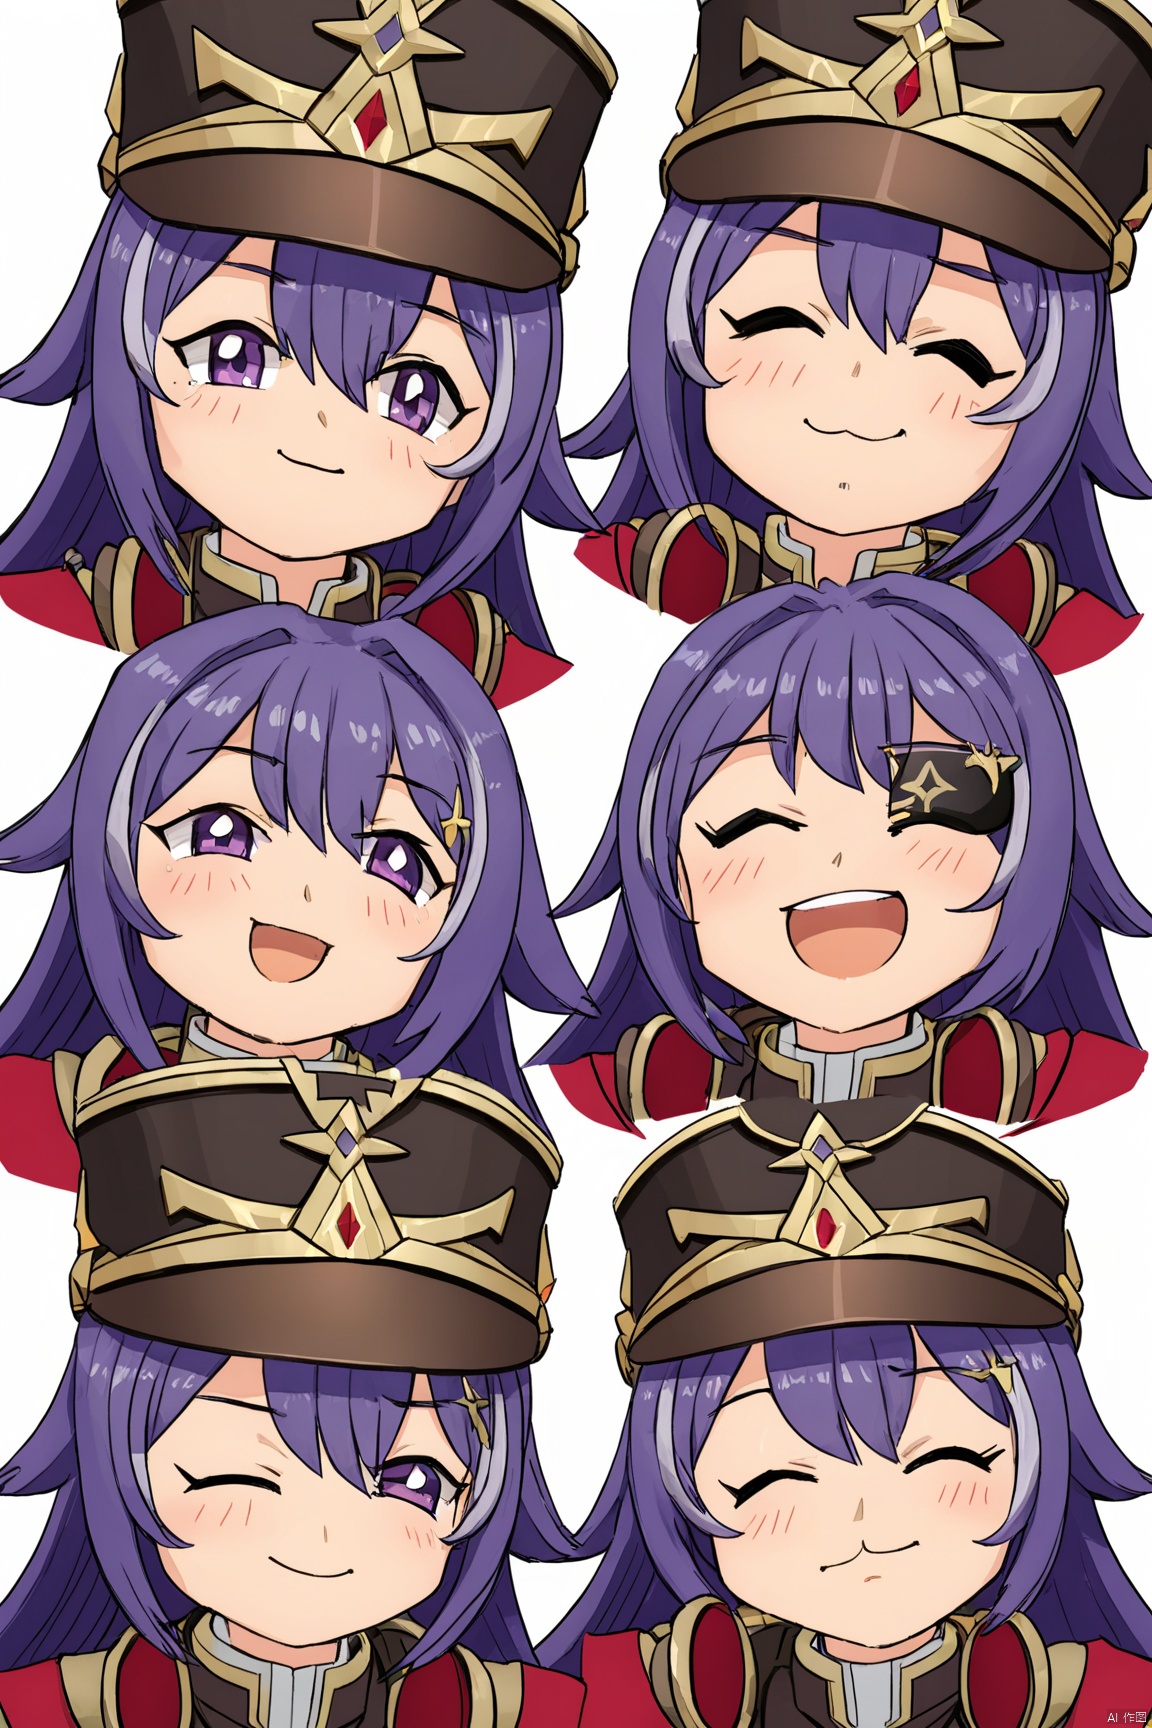 xwl, def clothe, 1girl, eyepatch, purple hair, purple eyes, long hair, hat, red gloves,
------------------------------
 masterpiece, best quality, ,multiple girls,white background,chibi,multiple view,face,smile,sad, open eyes,closed eyes, half-closed eyes, angry,no border,too many,overflow